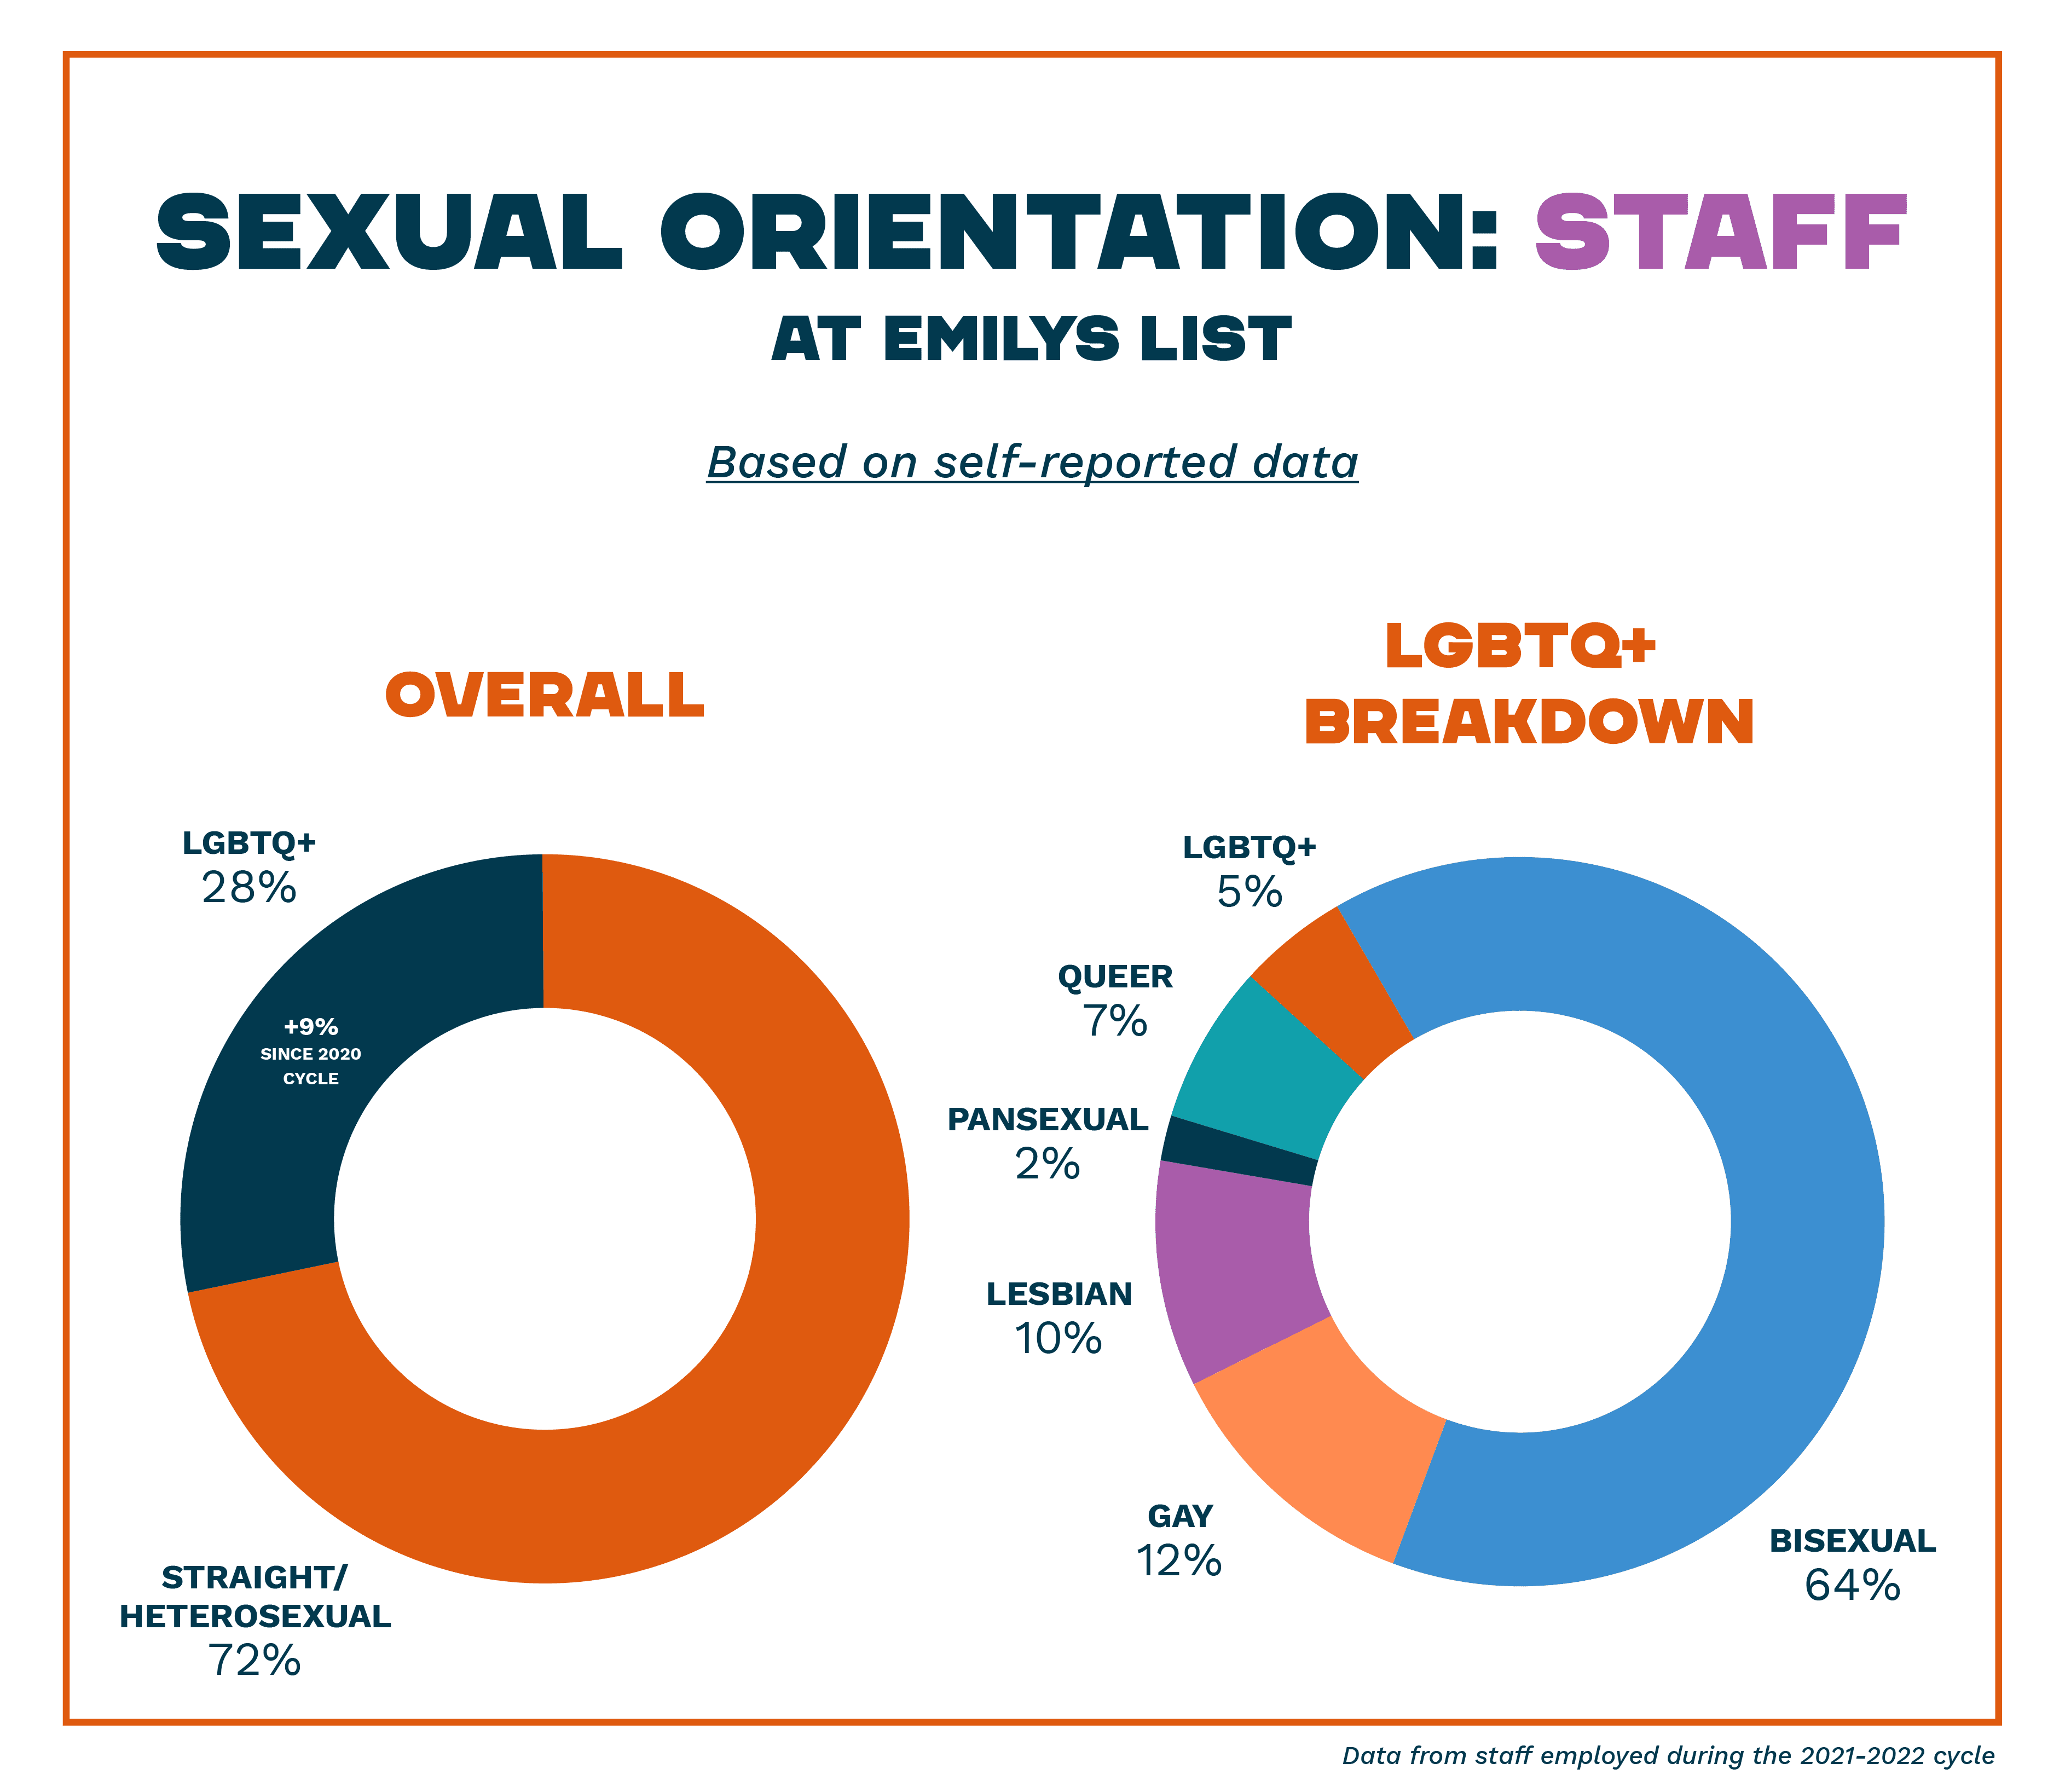 Sexual Orientation: Staff at EMILYs List - Based on self-reported data - Overall: Straight/Heterosexual 72%, LGBTQ+ 28% (9% increase since 2020 cycle). - LGBTQ+ Breakdown: Bisexual 64%, Gay 12%, Lesbian 10%, Pansexual 2%, Queer 7%, LGBTQ+ 5% - Data from staff employed during the 2021-2022 cycle